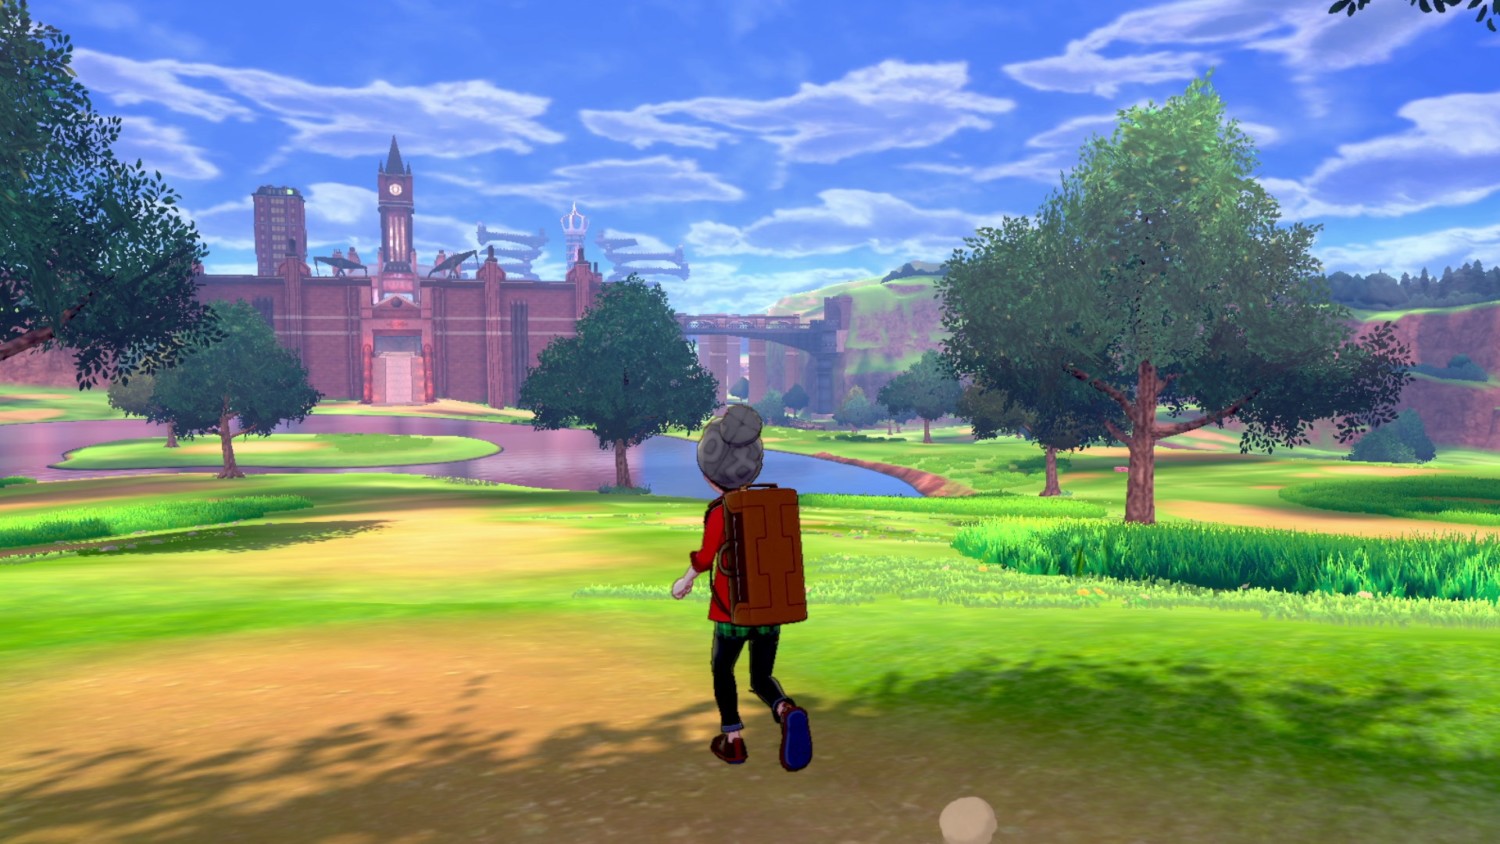 Dataminers Discover Additional Pokemon Beyond Galar Dex In Pokemon Sword  And Shield Code – NintendoSoup